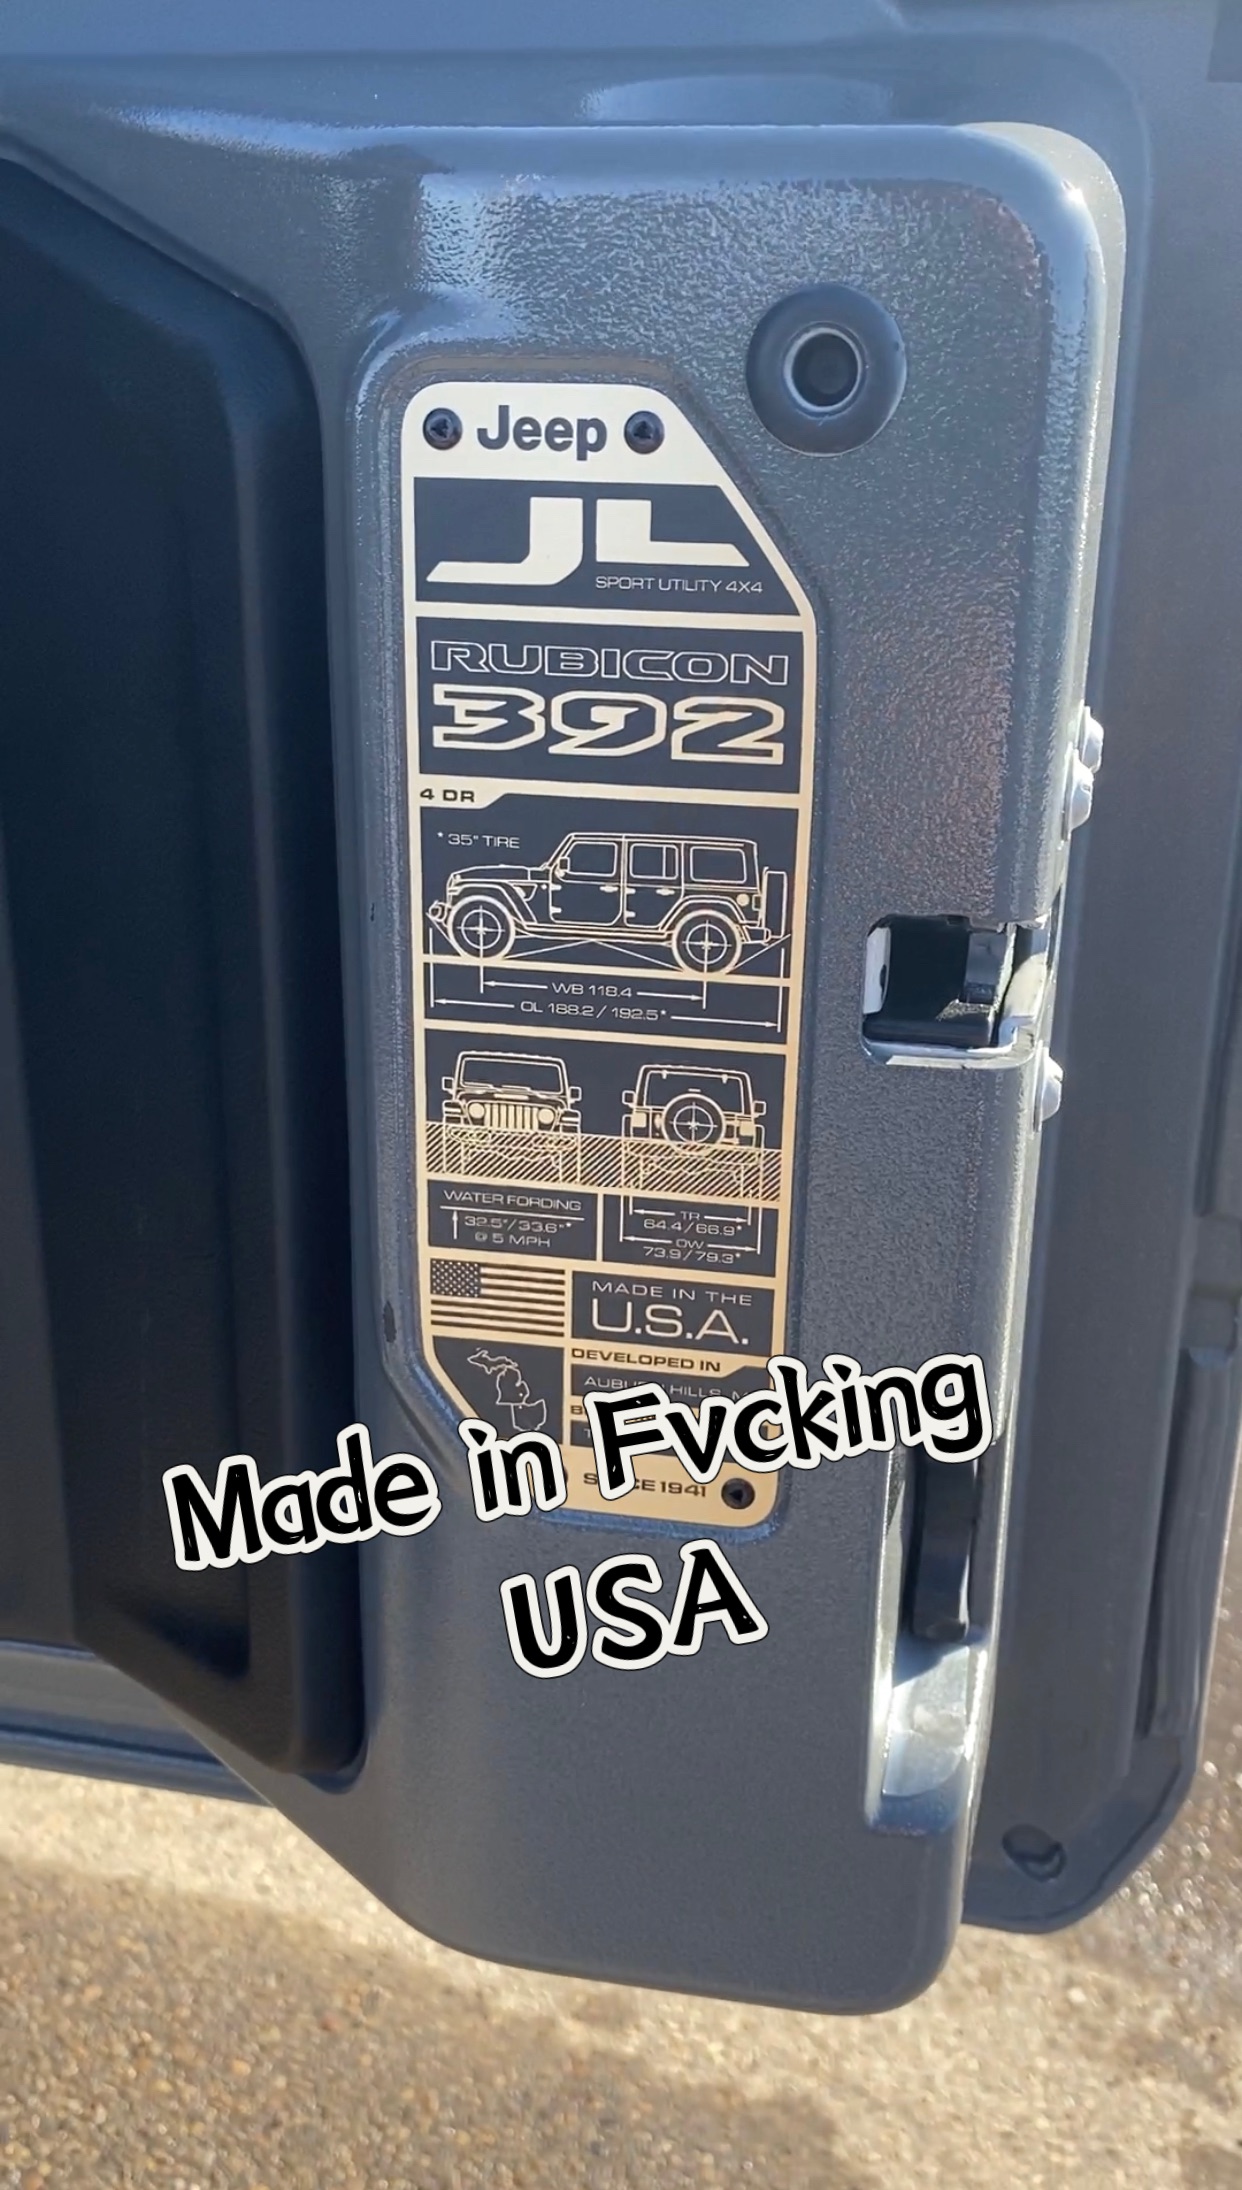 Made in Fvcking USA392Ƶ